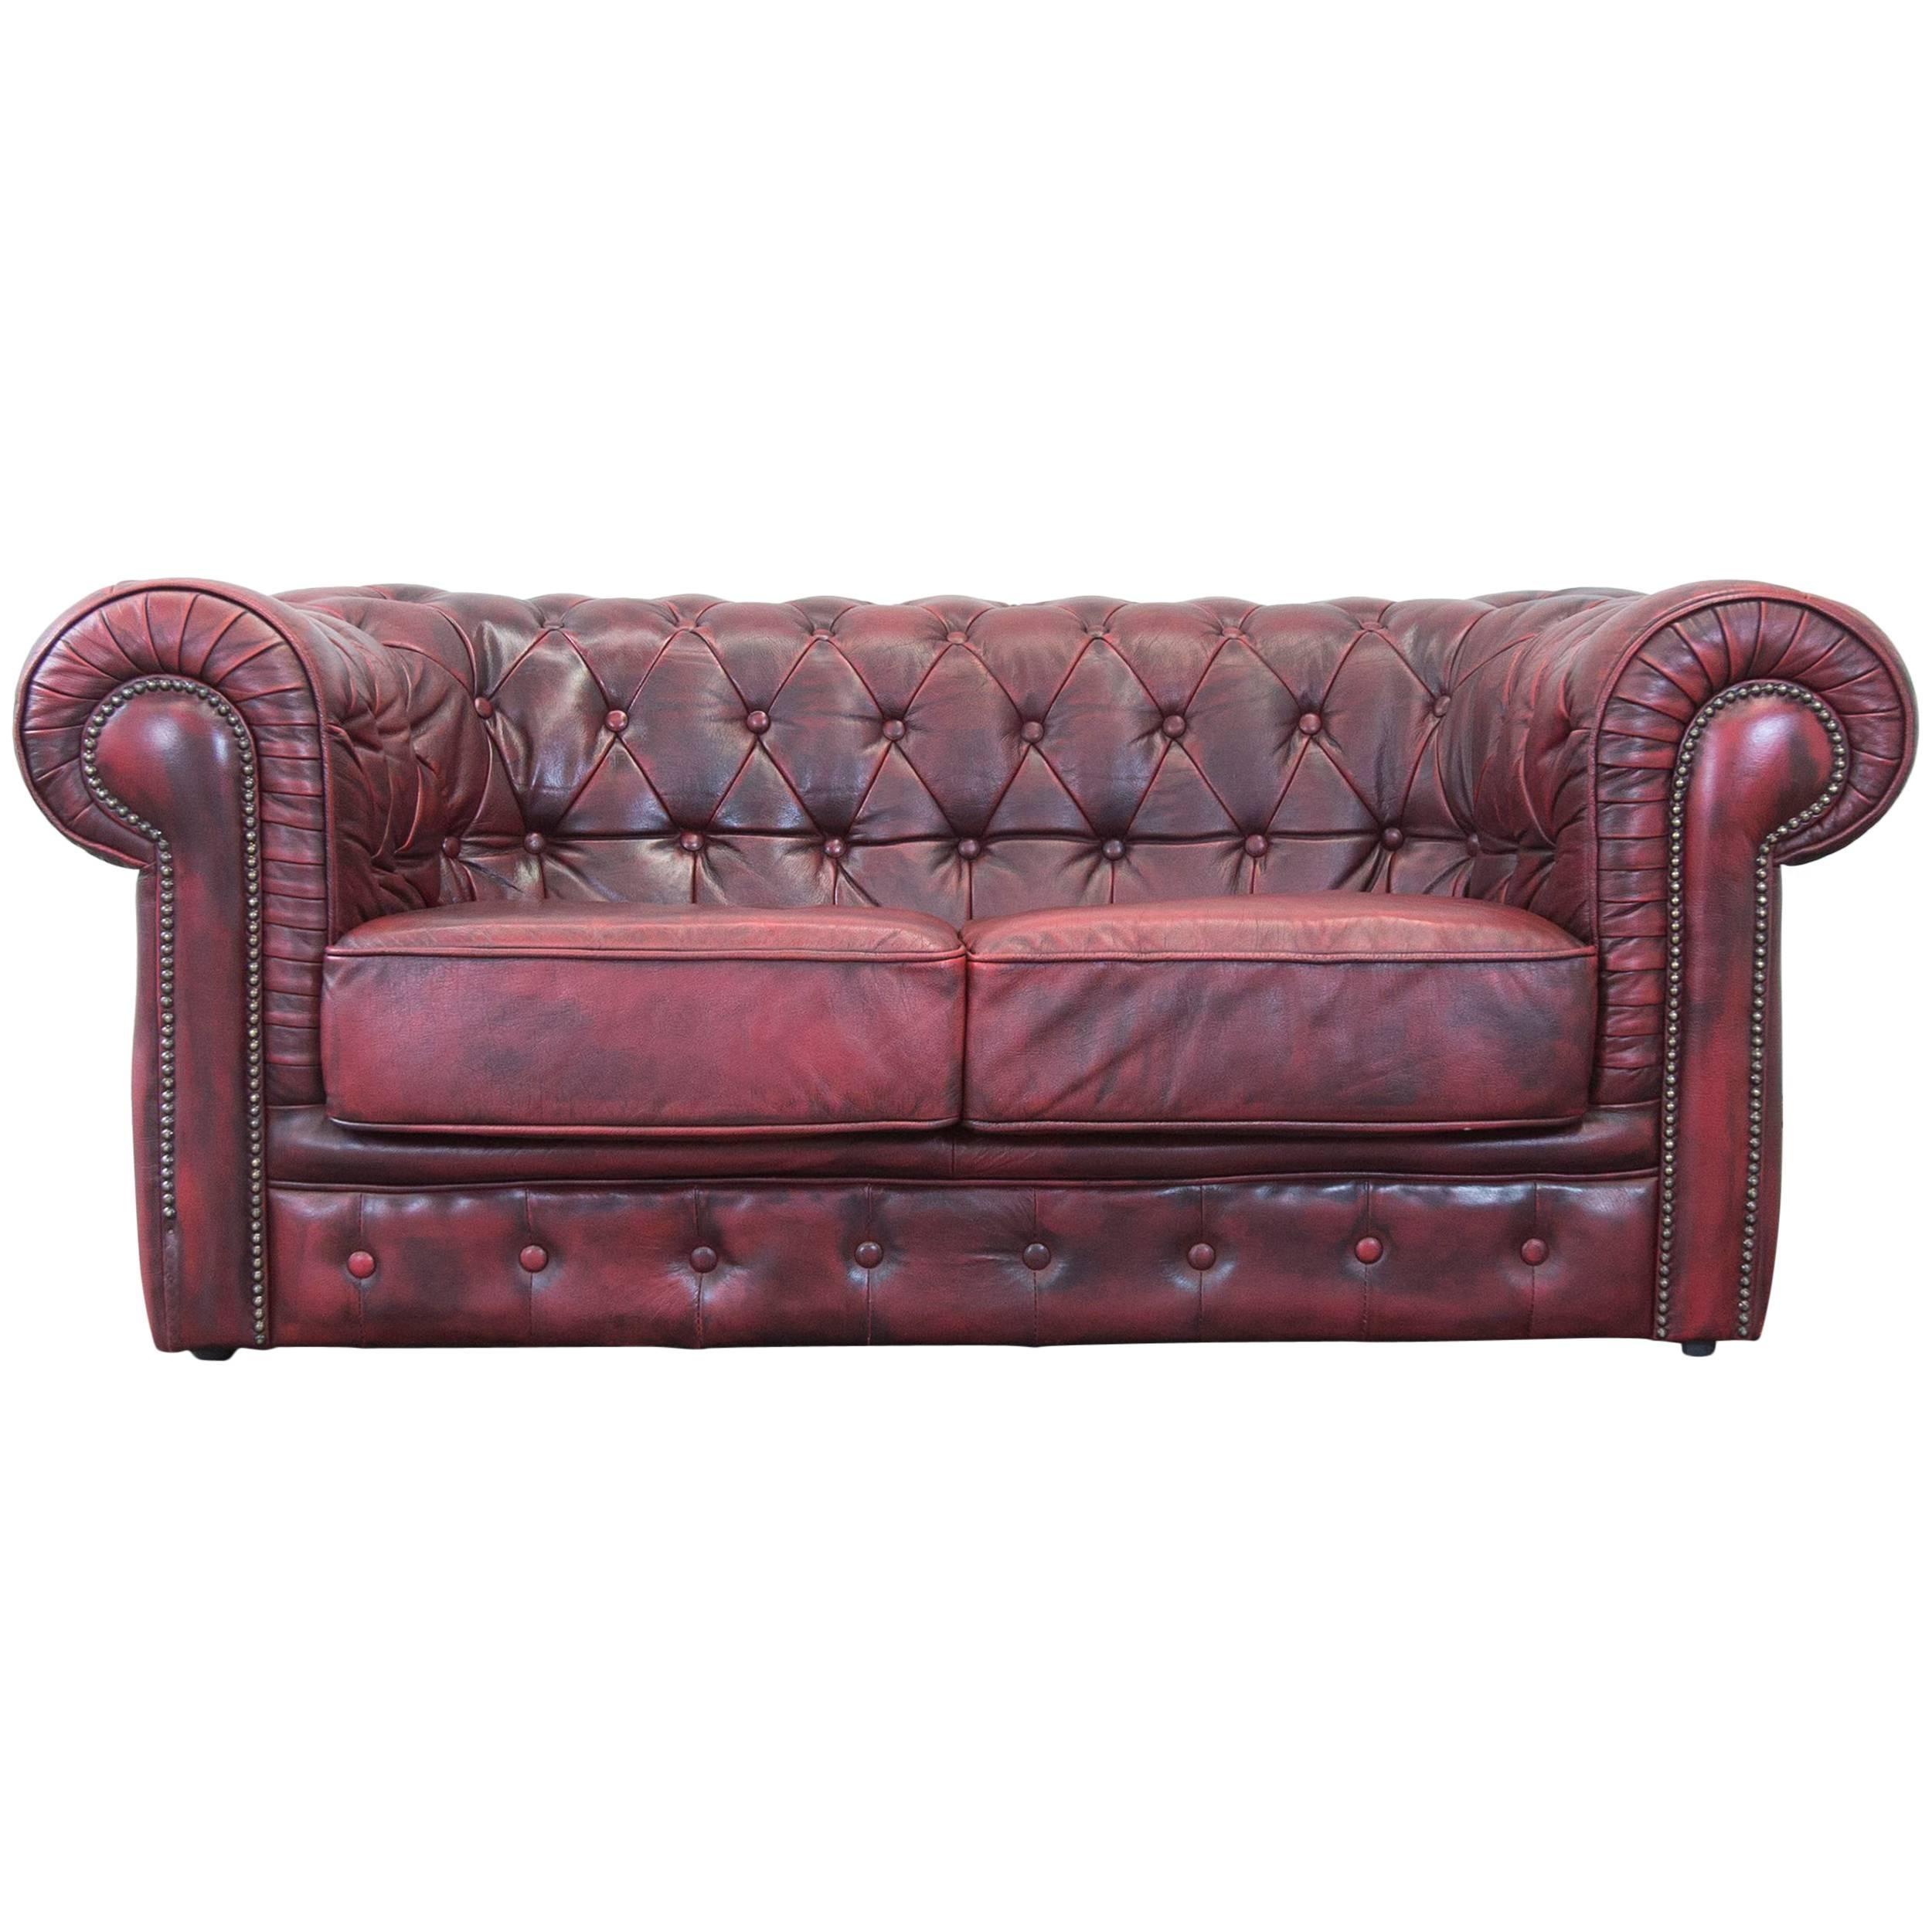 Chesterfield Designer Leather Sofa Red Two-Seat Couch Vintage Retro